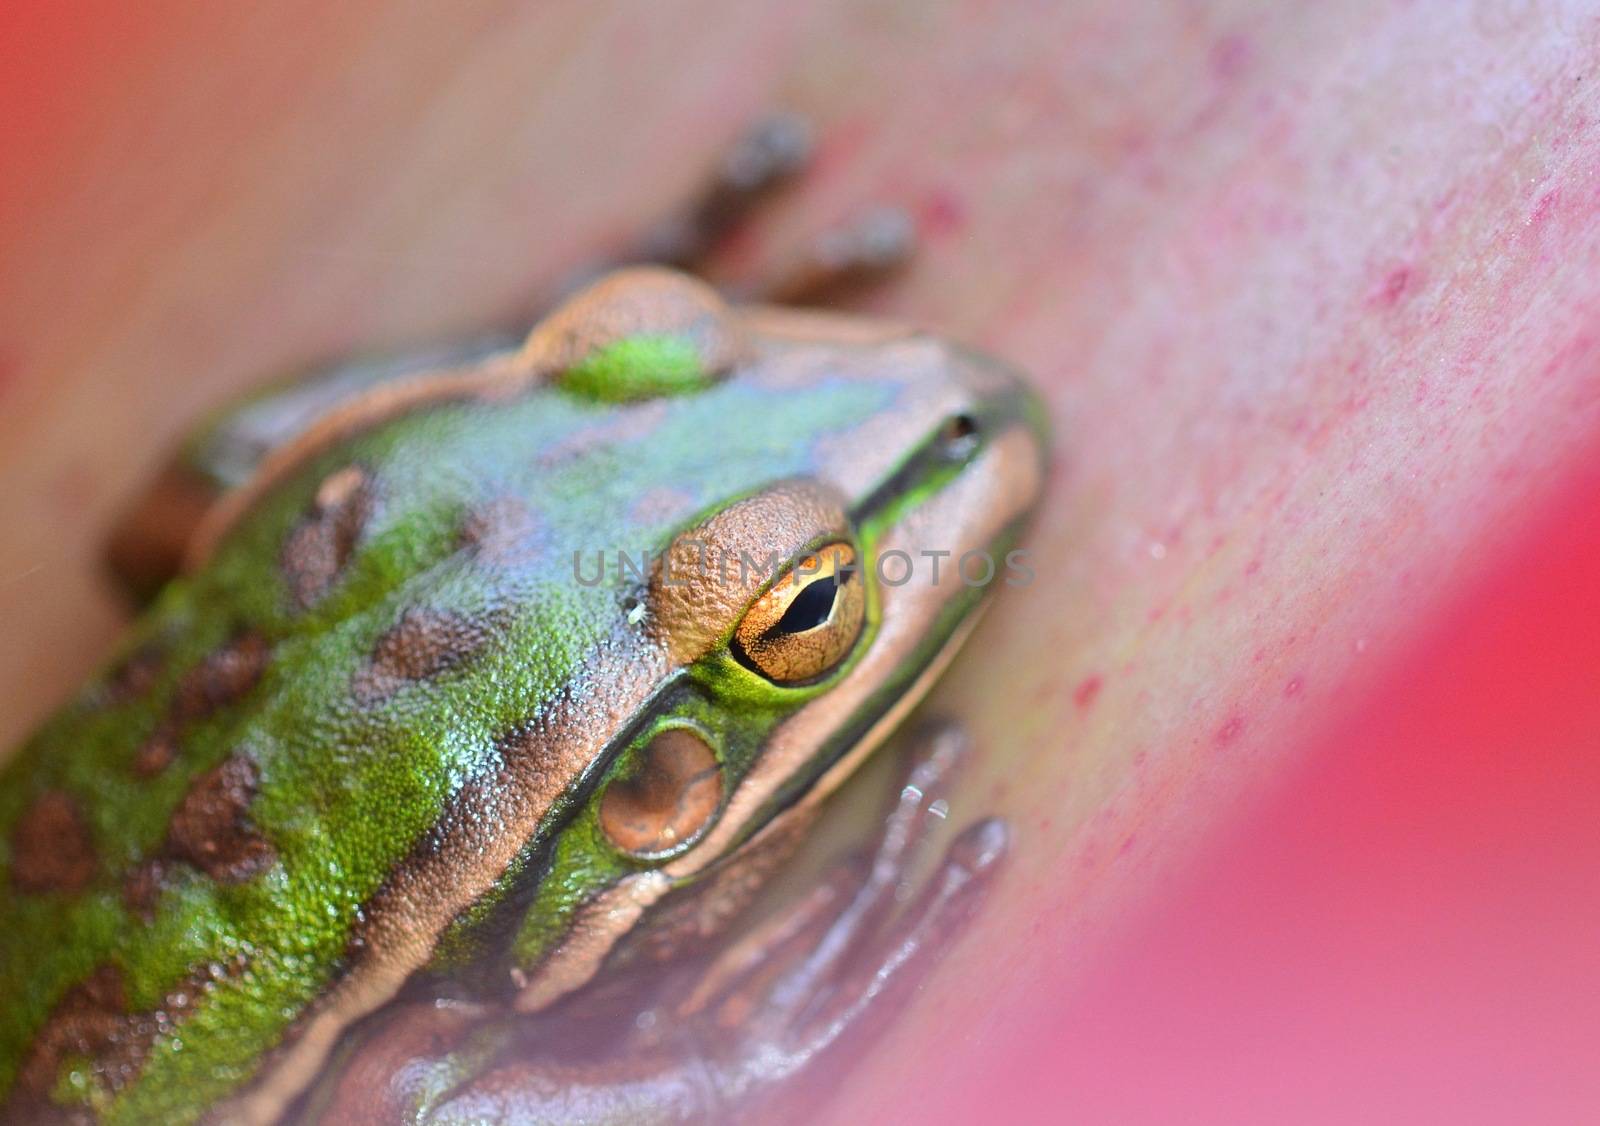 A close-up photo of a frog (Litoria aurea; Green and Golden Bell frog) resting in Bromellia plant; shallow depth of field with accent on the eyes. by Marshalkina